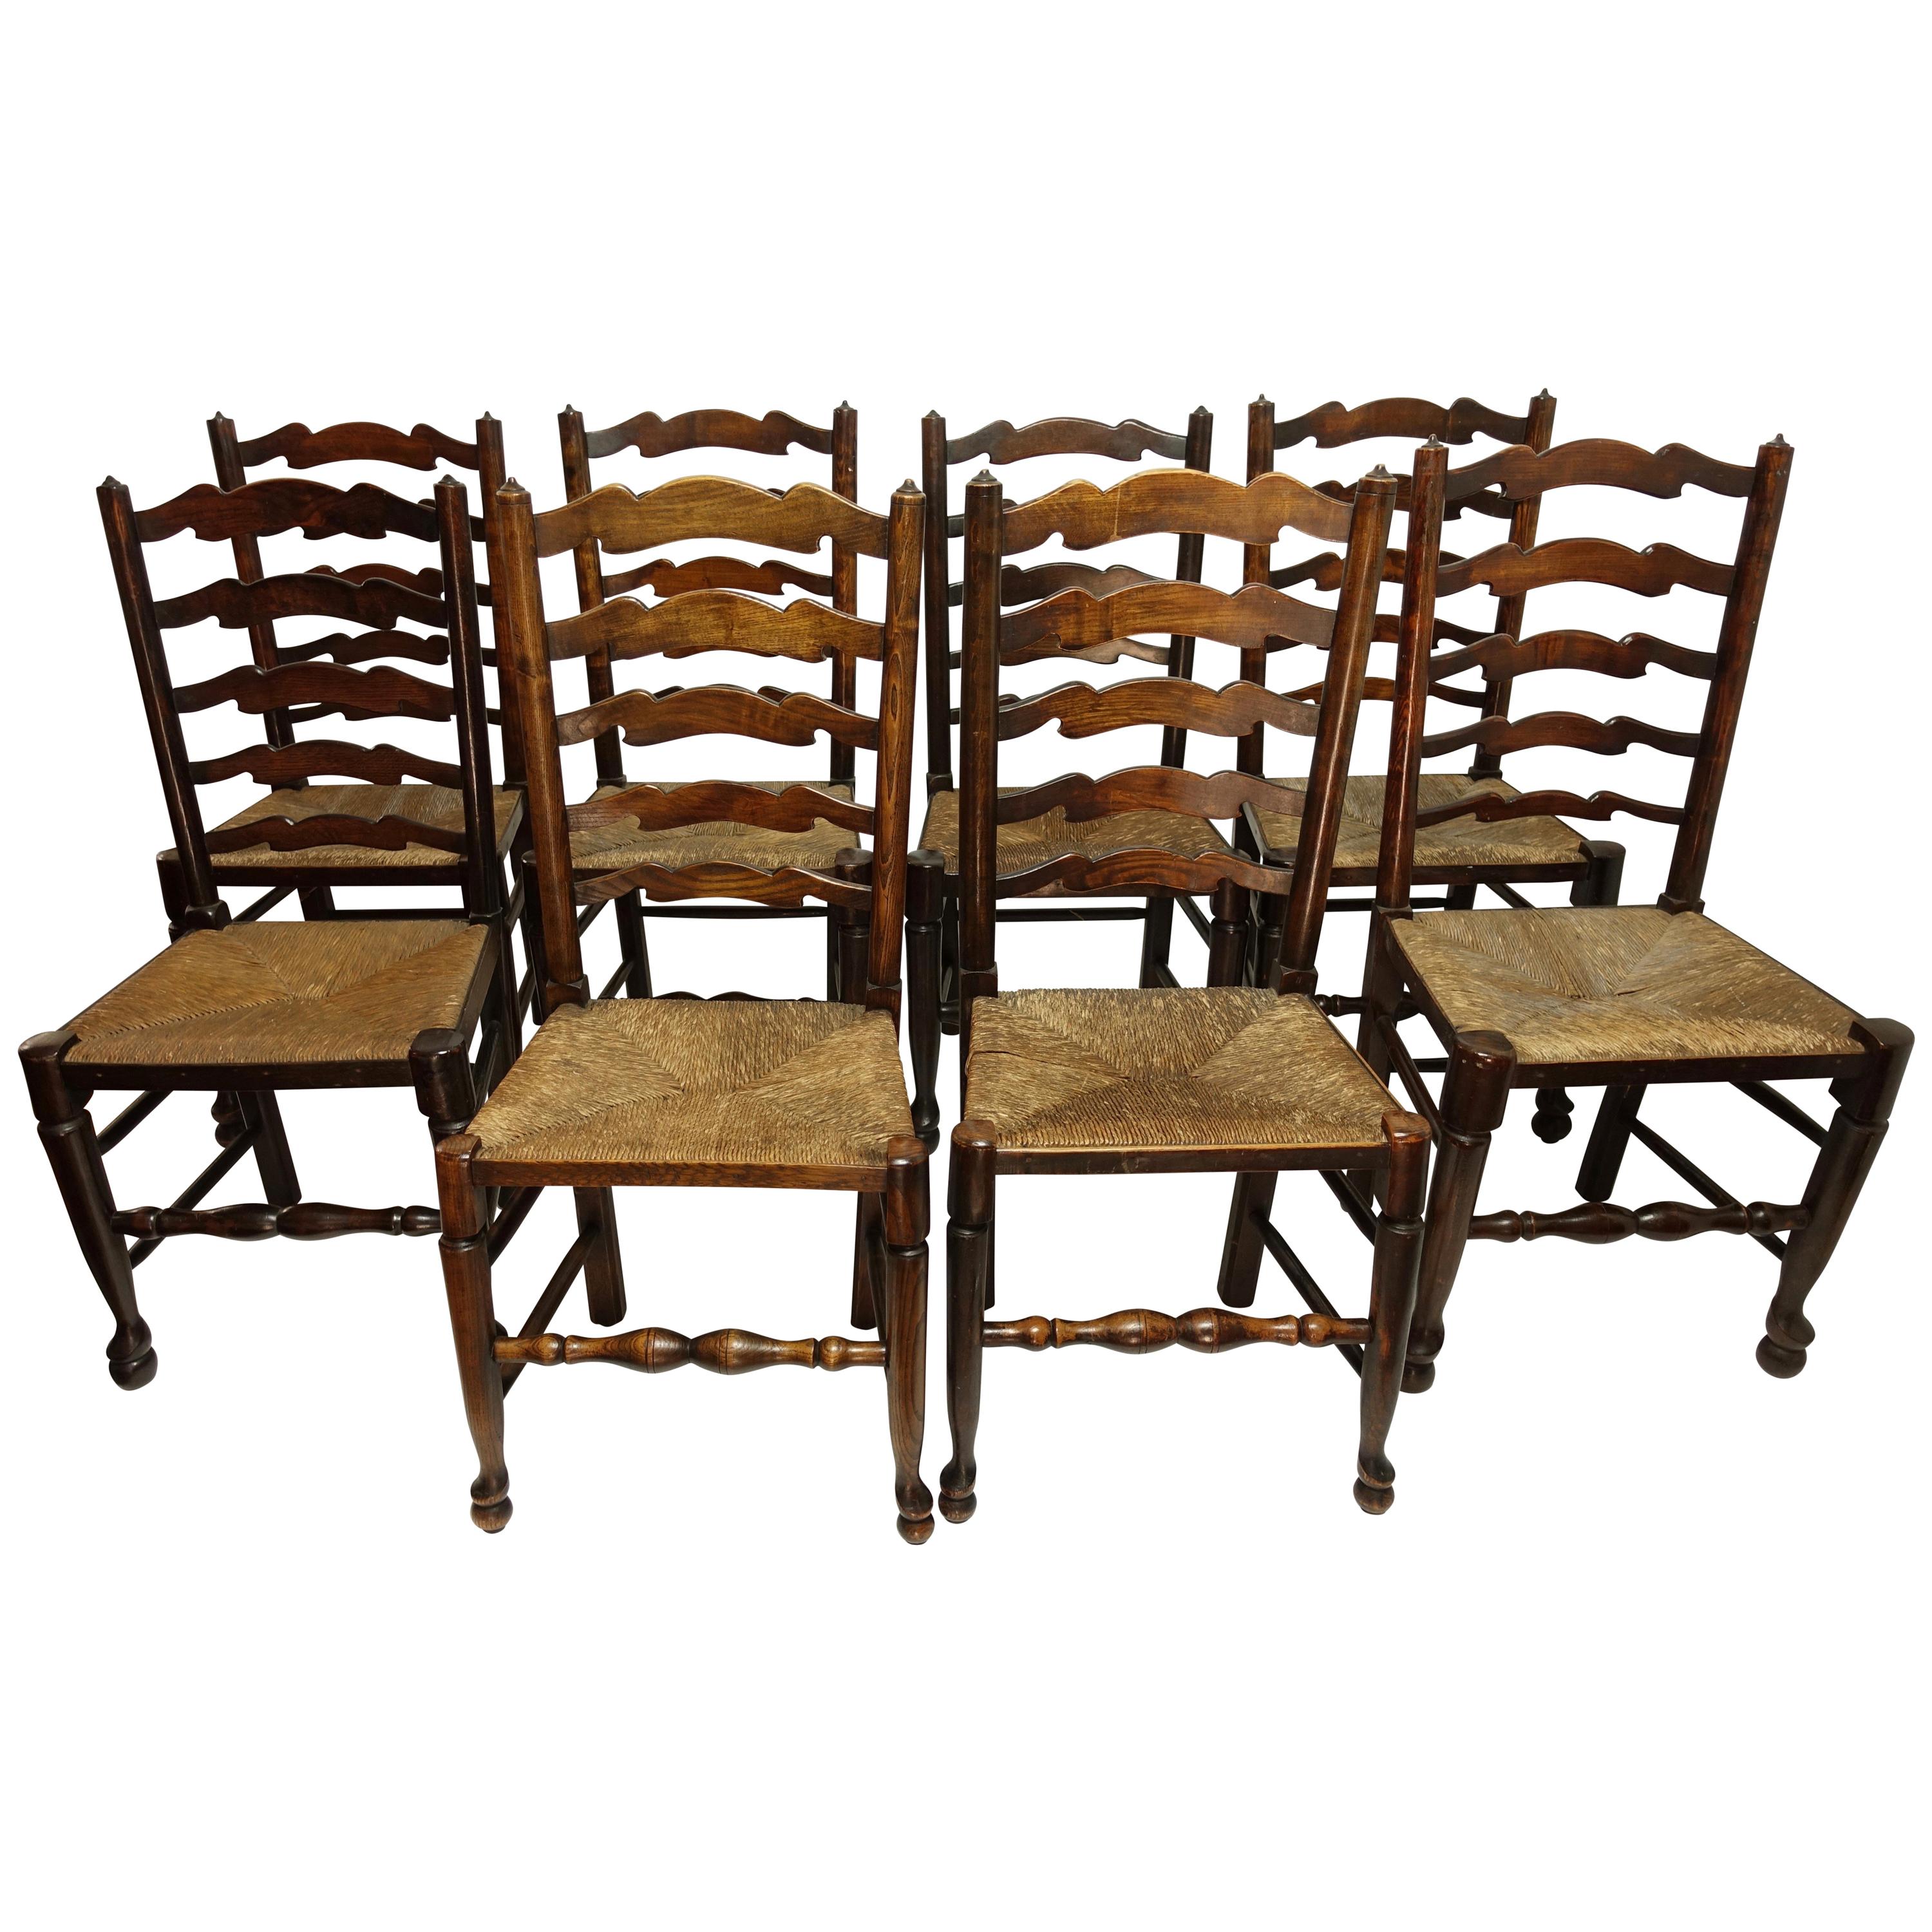 Eight Elmwood Lancashire Ladder Back Dining Chairs, English Early 20th Century